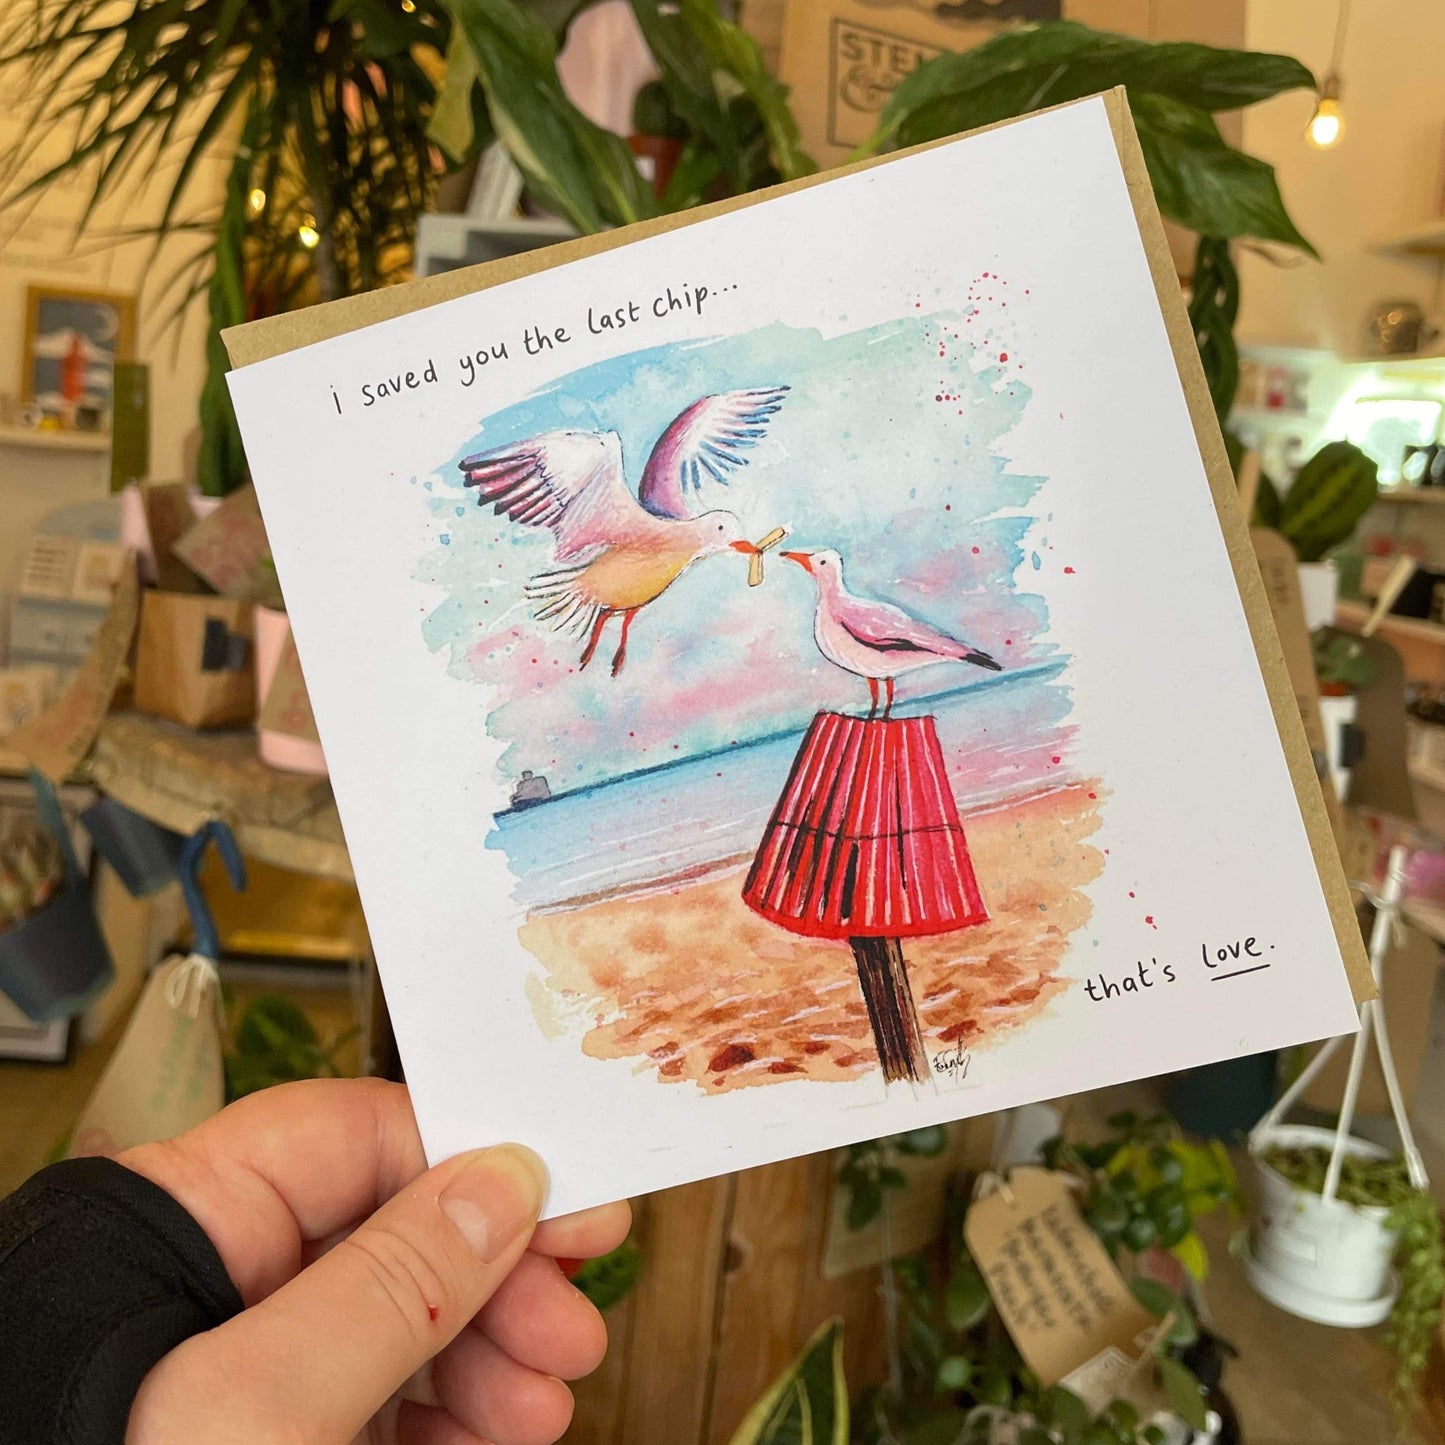 A recycled greetings card featuring a watercolour illustration of two seagulls on Cleethorpes beach exchanging a chip; painted by Cleethorpes artist, Eve Leoni Smith.